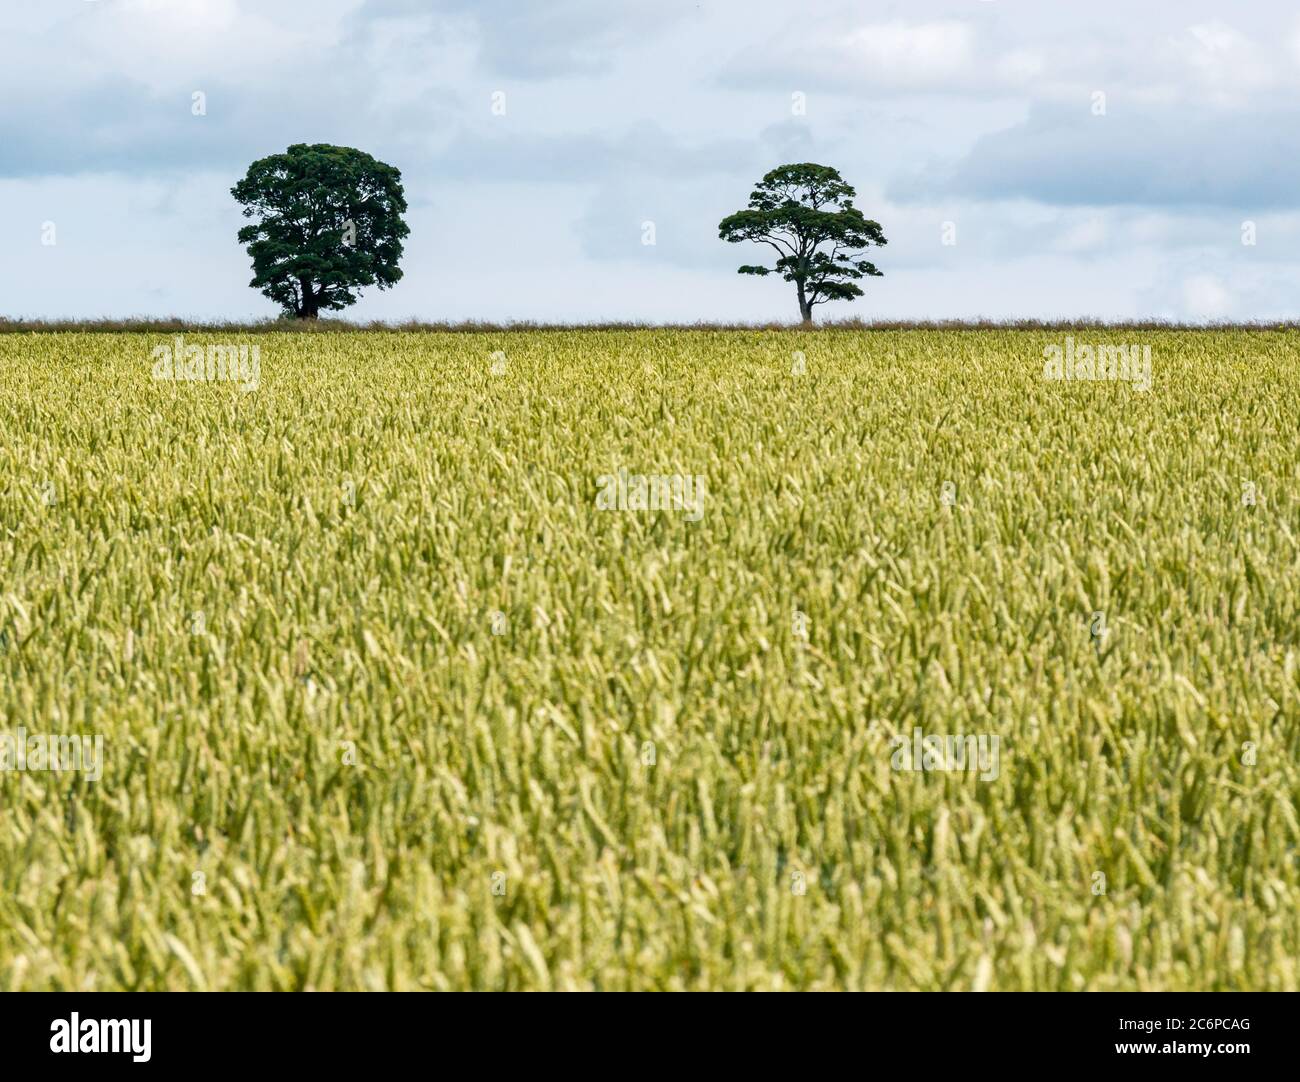 Two distinctive solitary trees, one a sycamore tree (Acer pseudoplatanus) on the edge of a wheat field in Summer sunshine, East Lothian, Scotland, UK Stock Photo